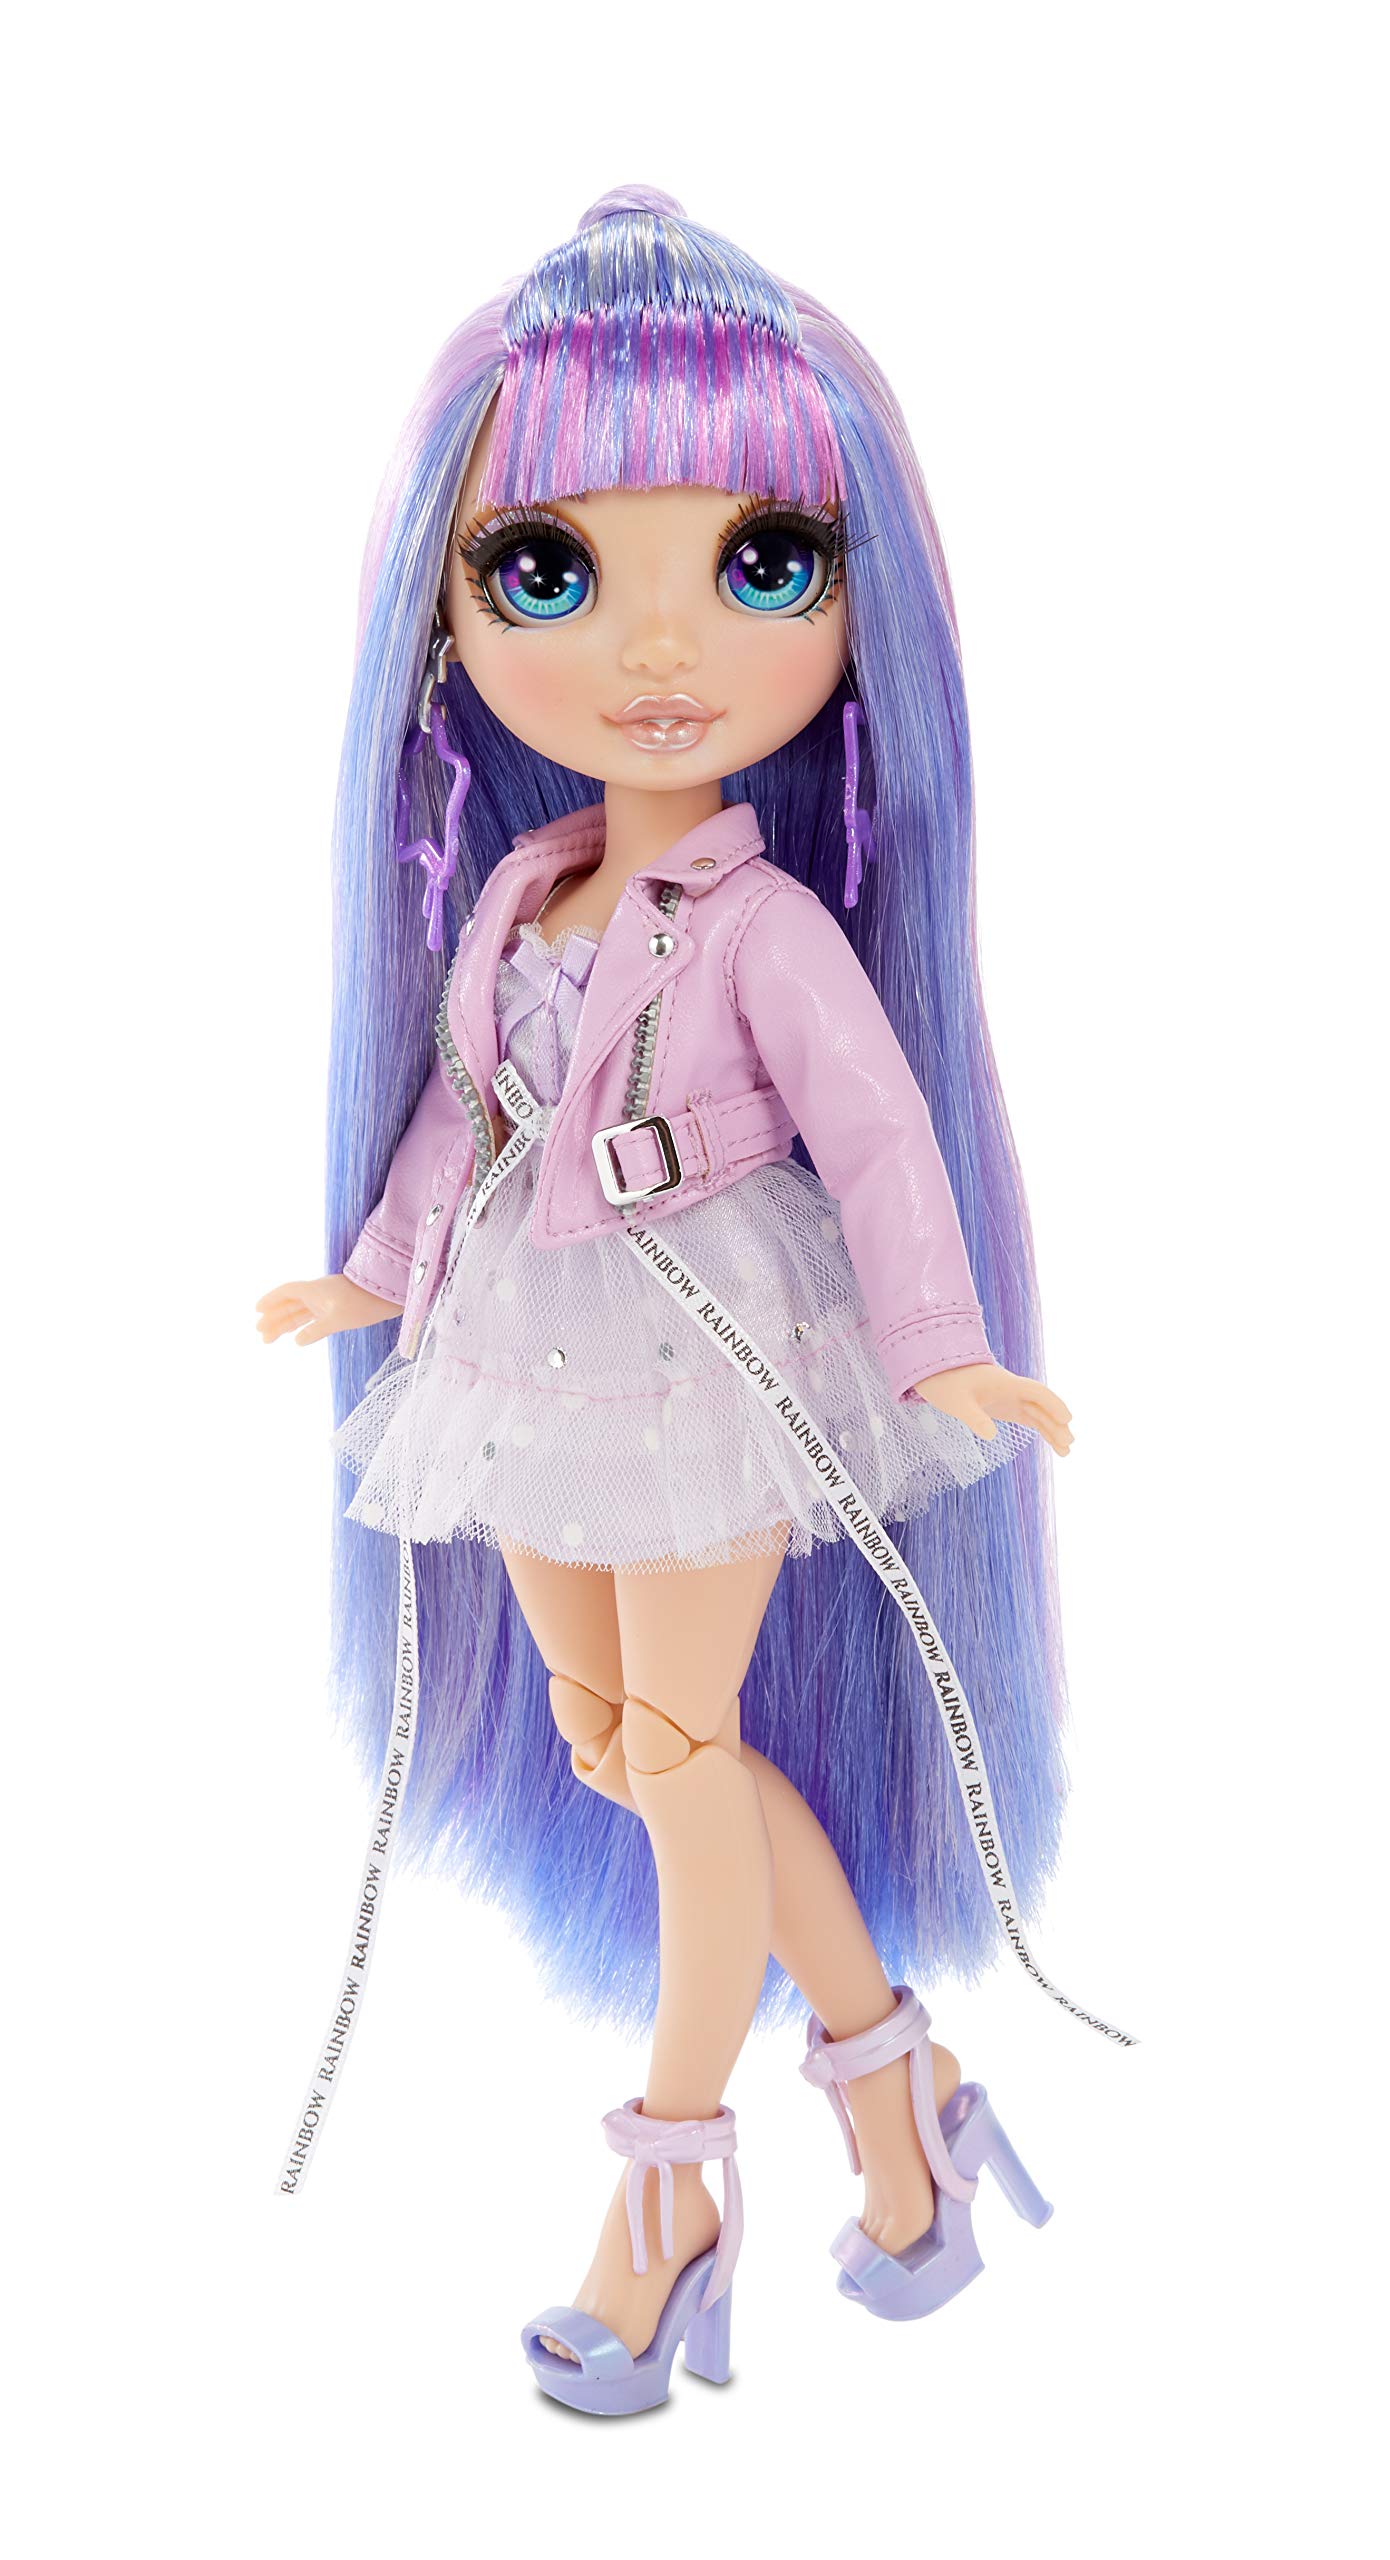 Rainbow High Violet Willow - Purple Clothes Fashion Doll with 2 Complete Mix & Match Outfits and Accessories, Toys for Kids 6 to 12 Years Old, Multicolor.